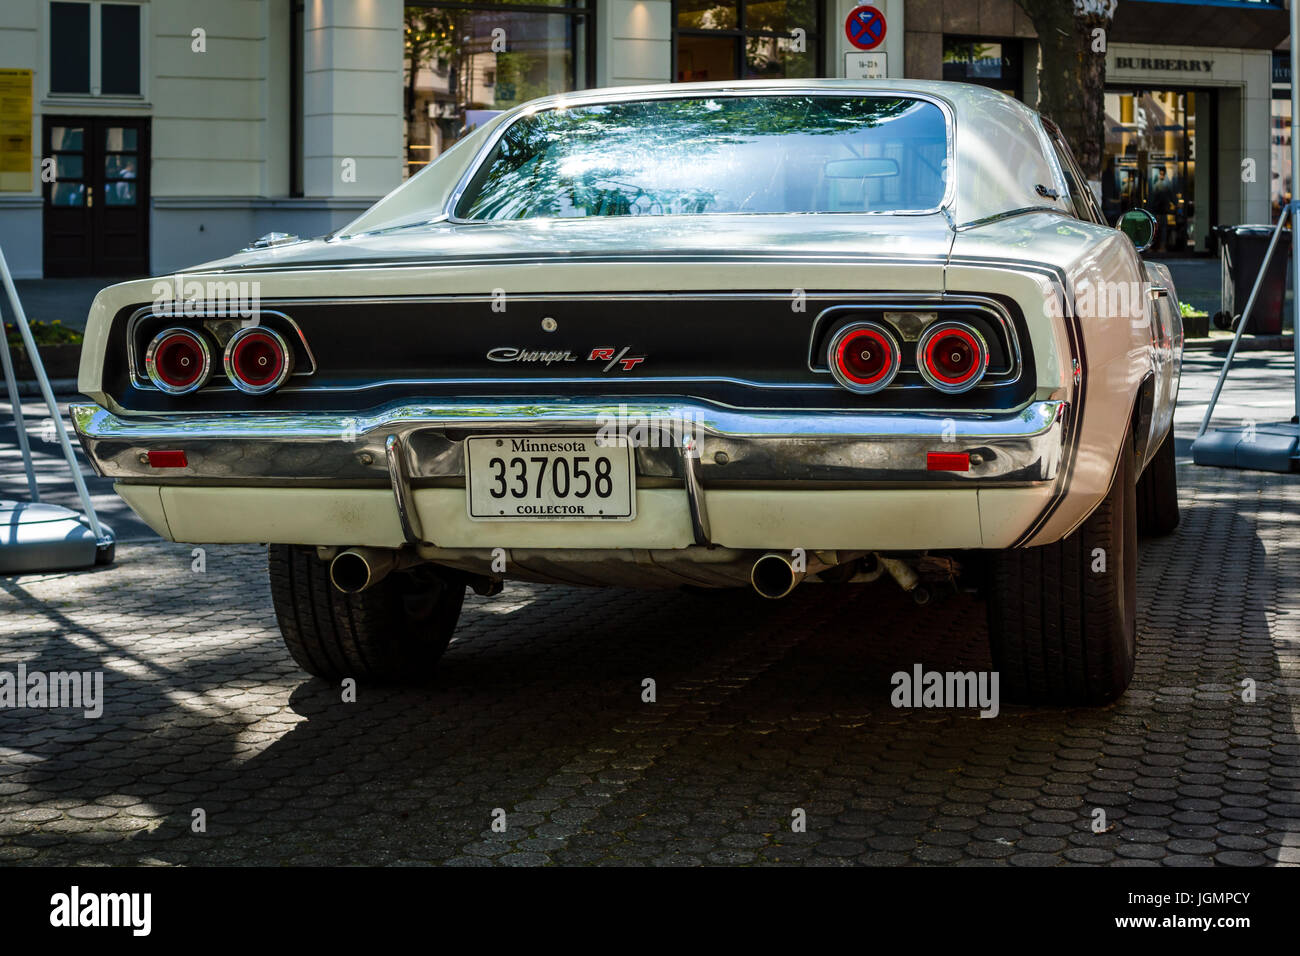 BERLIN - JUNE 17, 2017: Mid-size car Dodge Charger R/T, 1968. Rear view. Classic Days Berlin 2017. Stock Photo